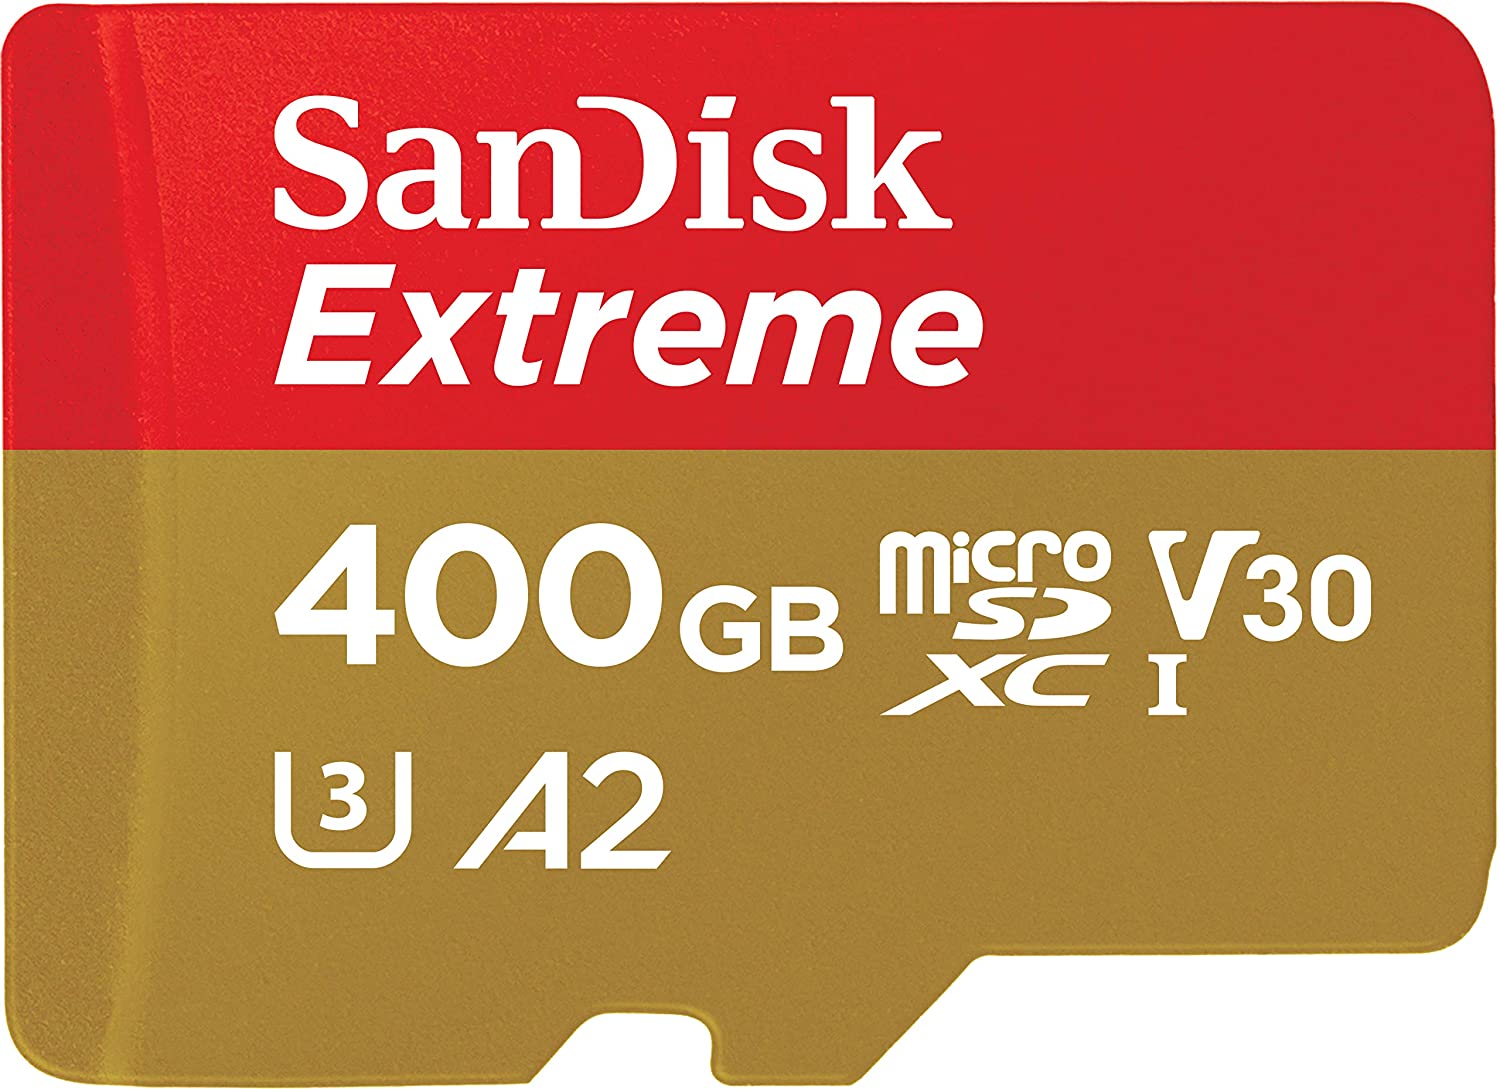 Sandisk Extreme Micro SD memory card 400GB